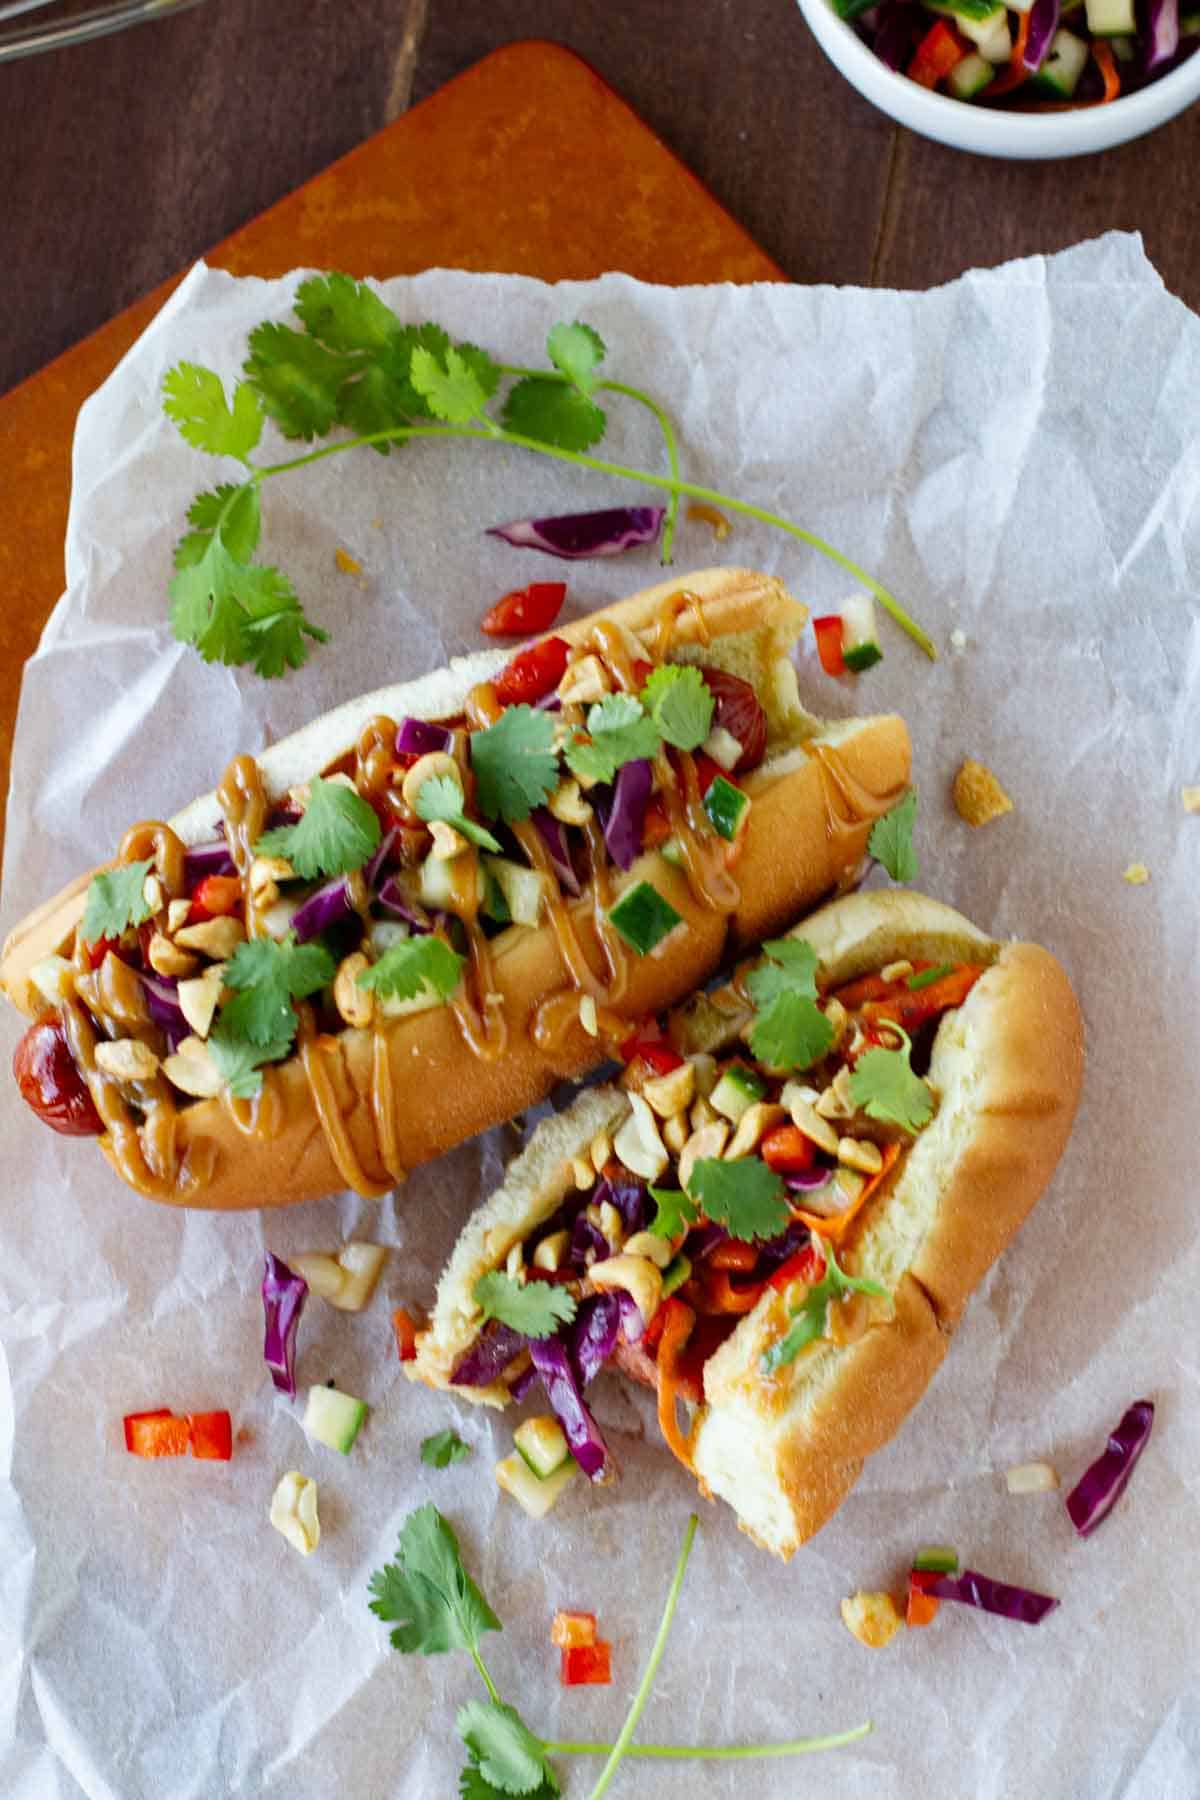 Two Thai Style Hot Dogs with a bite taken from one.